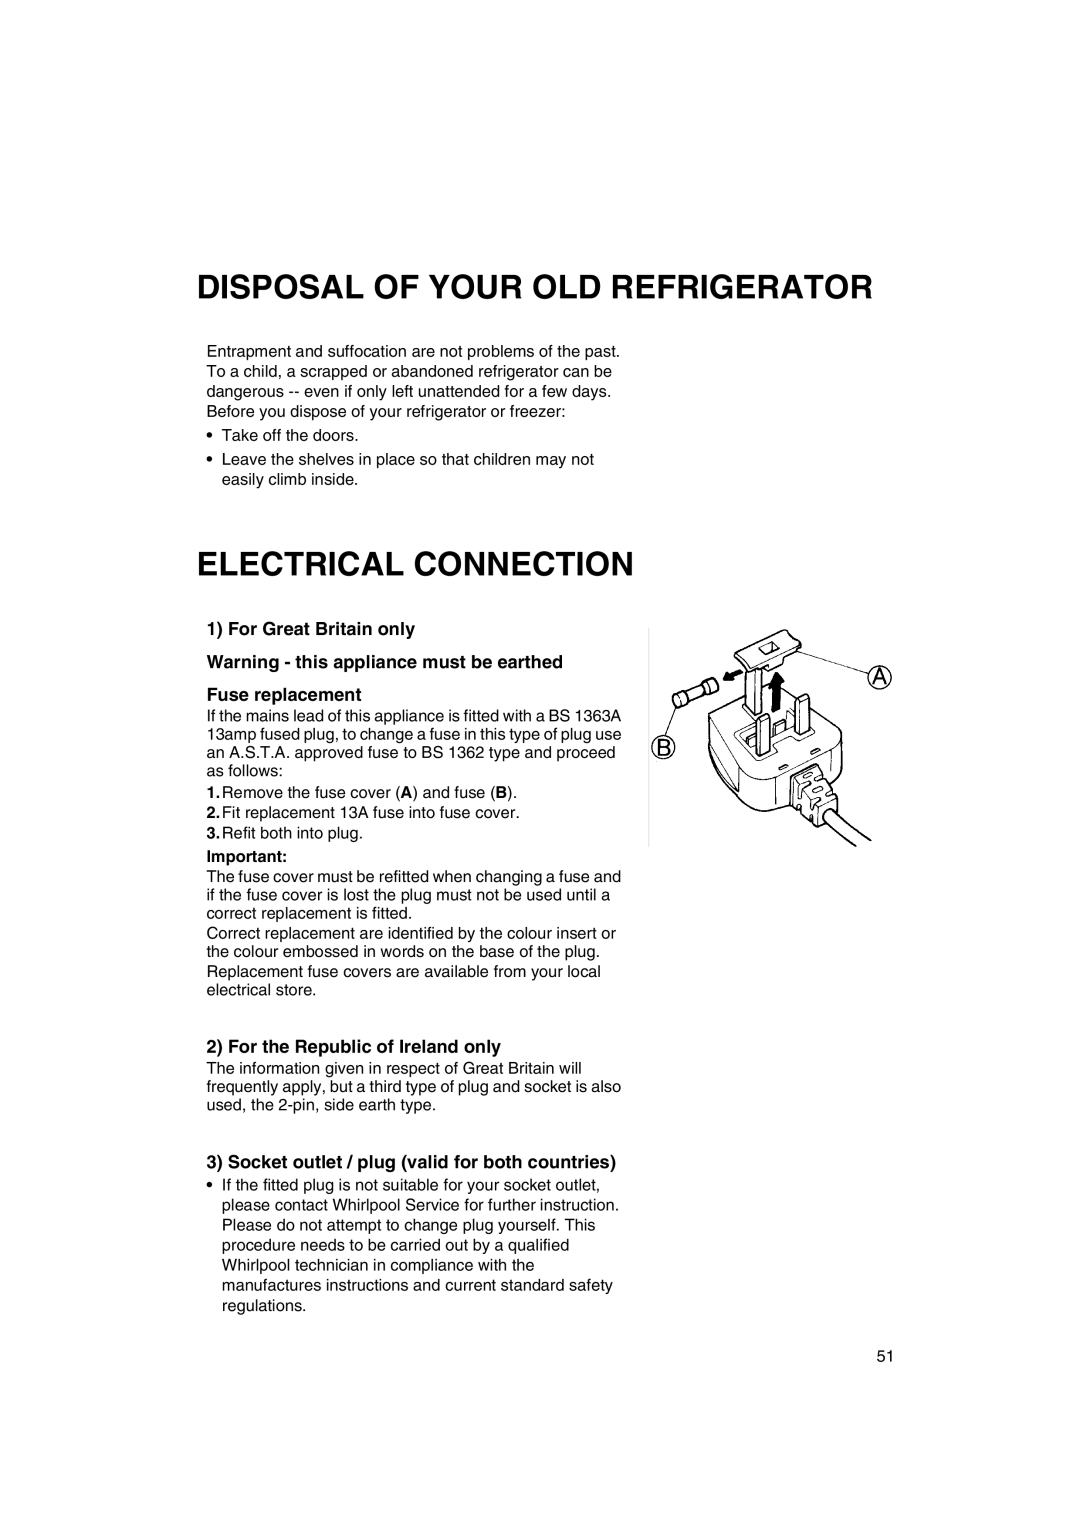 Smeg FA550XBI Disposal Of Your Old Refrigerator, Electrical Connection, Fuse replacement, For the Republic of Ireland only 